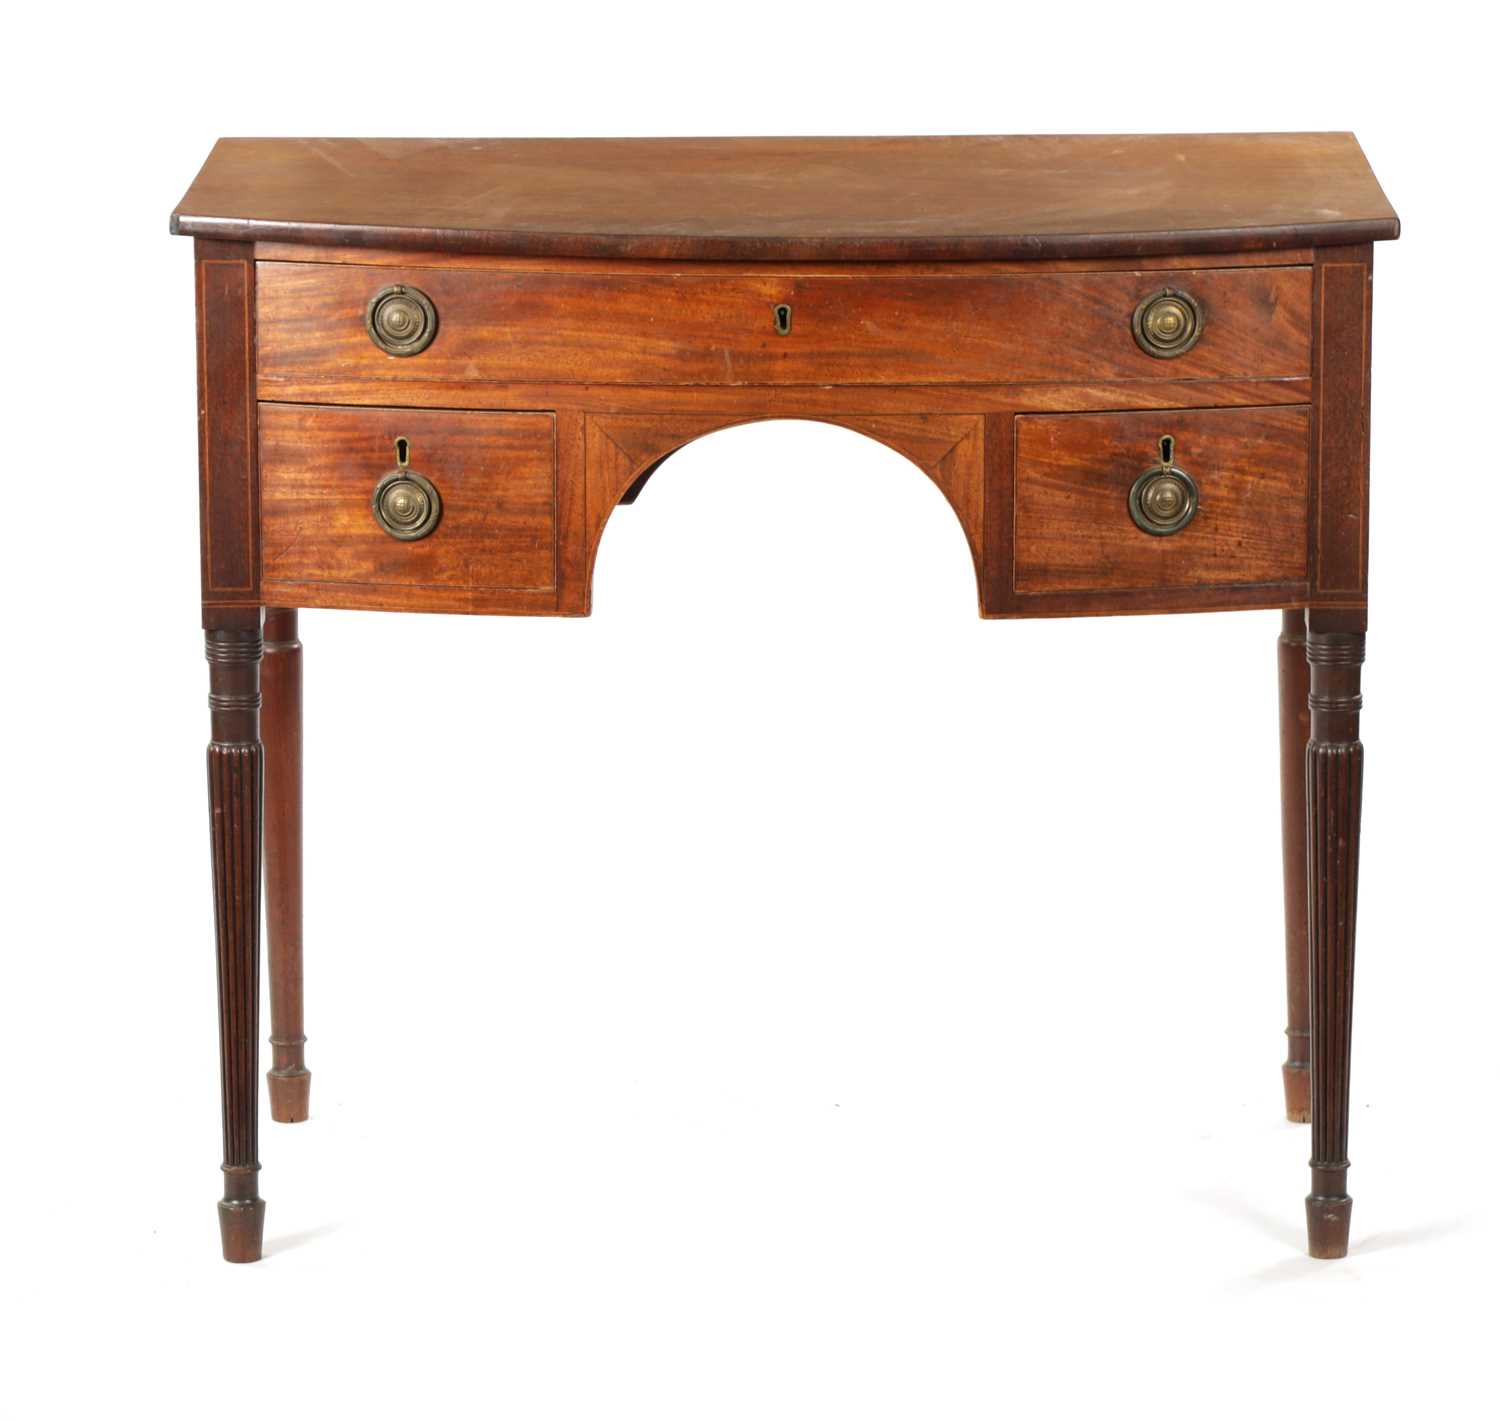 A REGENCY GILLOWS STYLE MAHOGANY BOW FRONTED SIDE TABLE